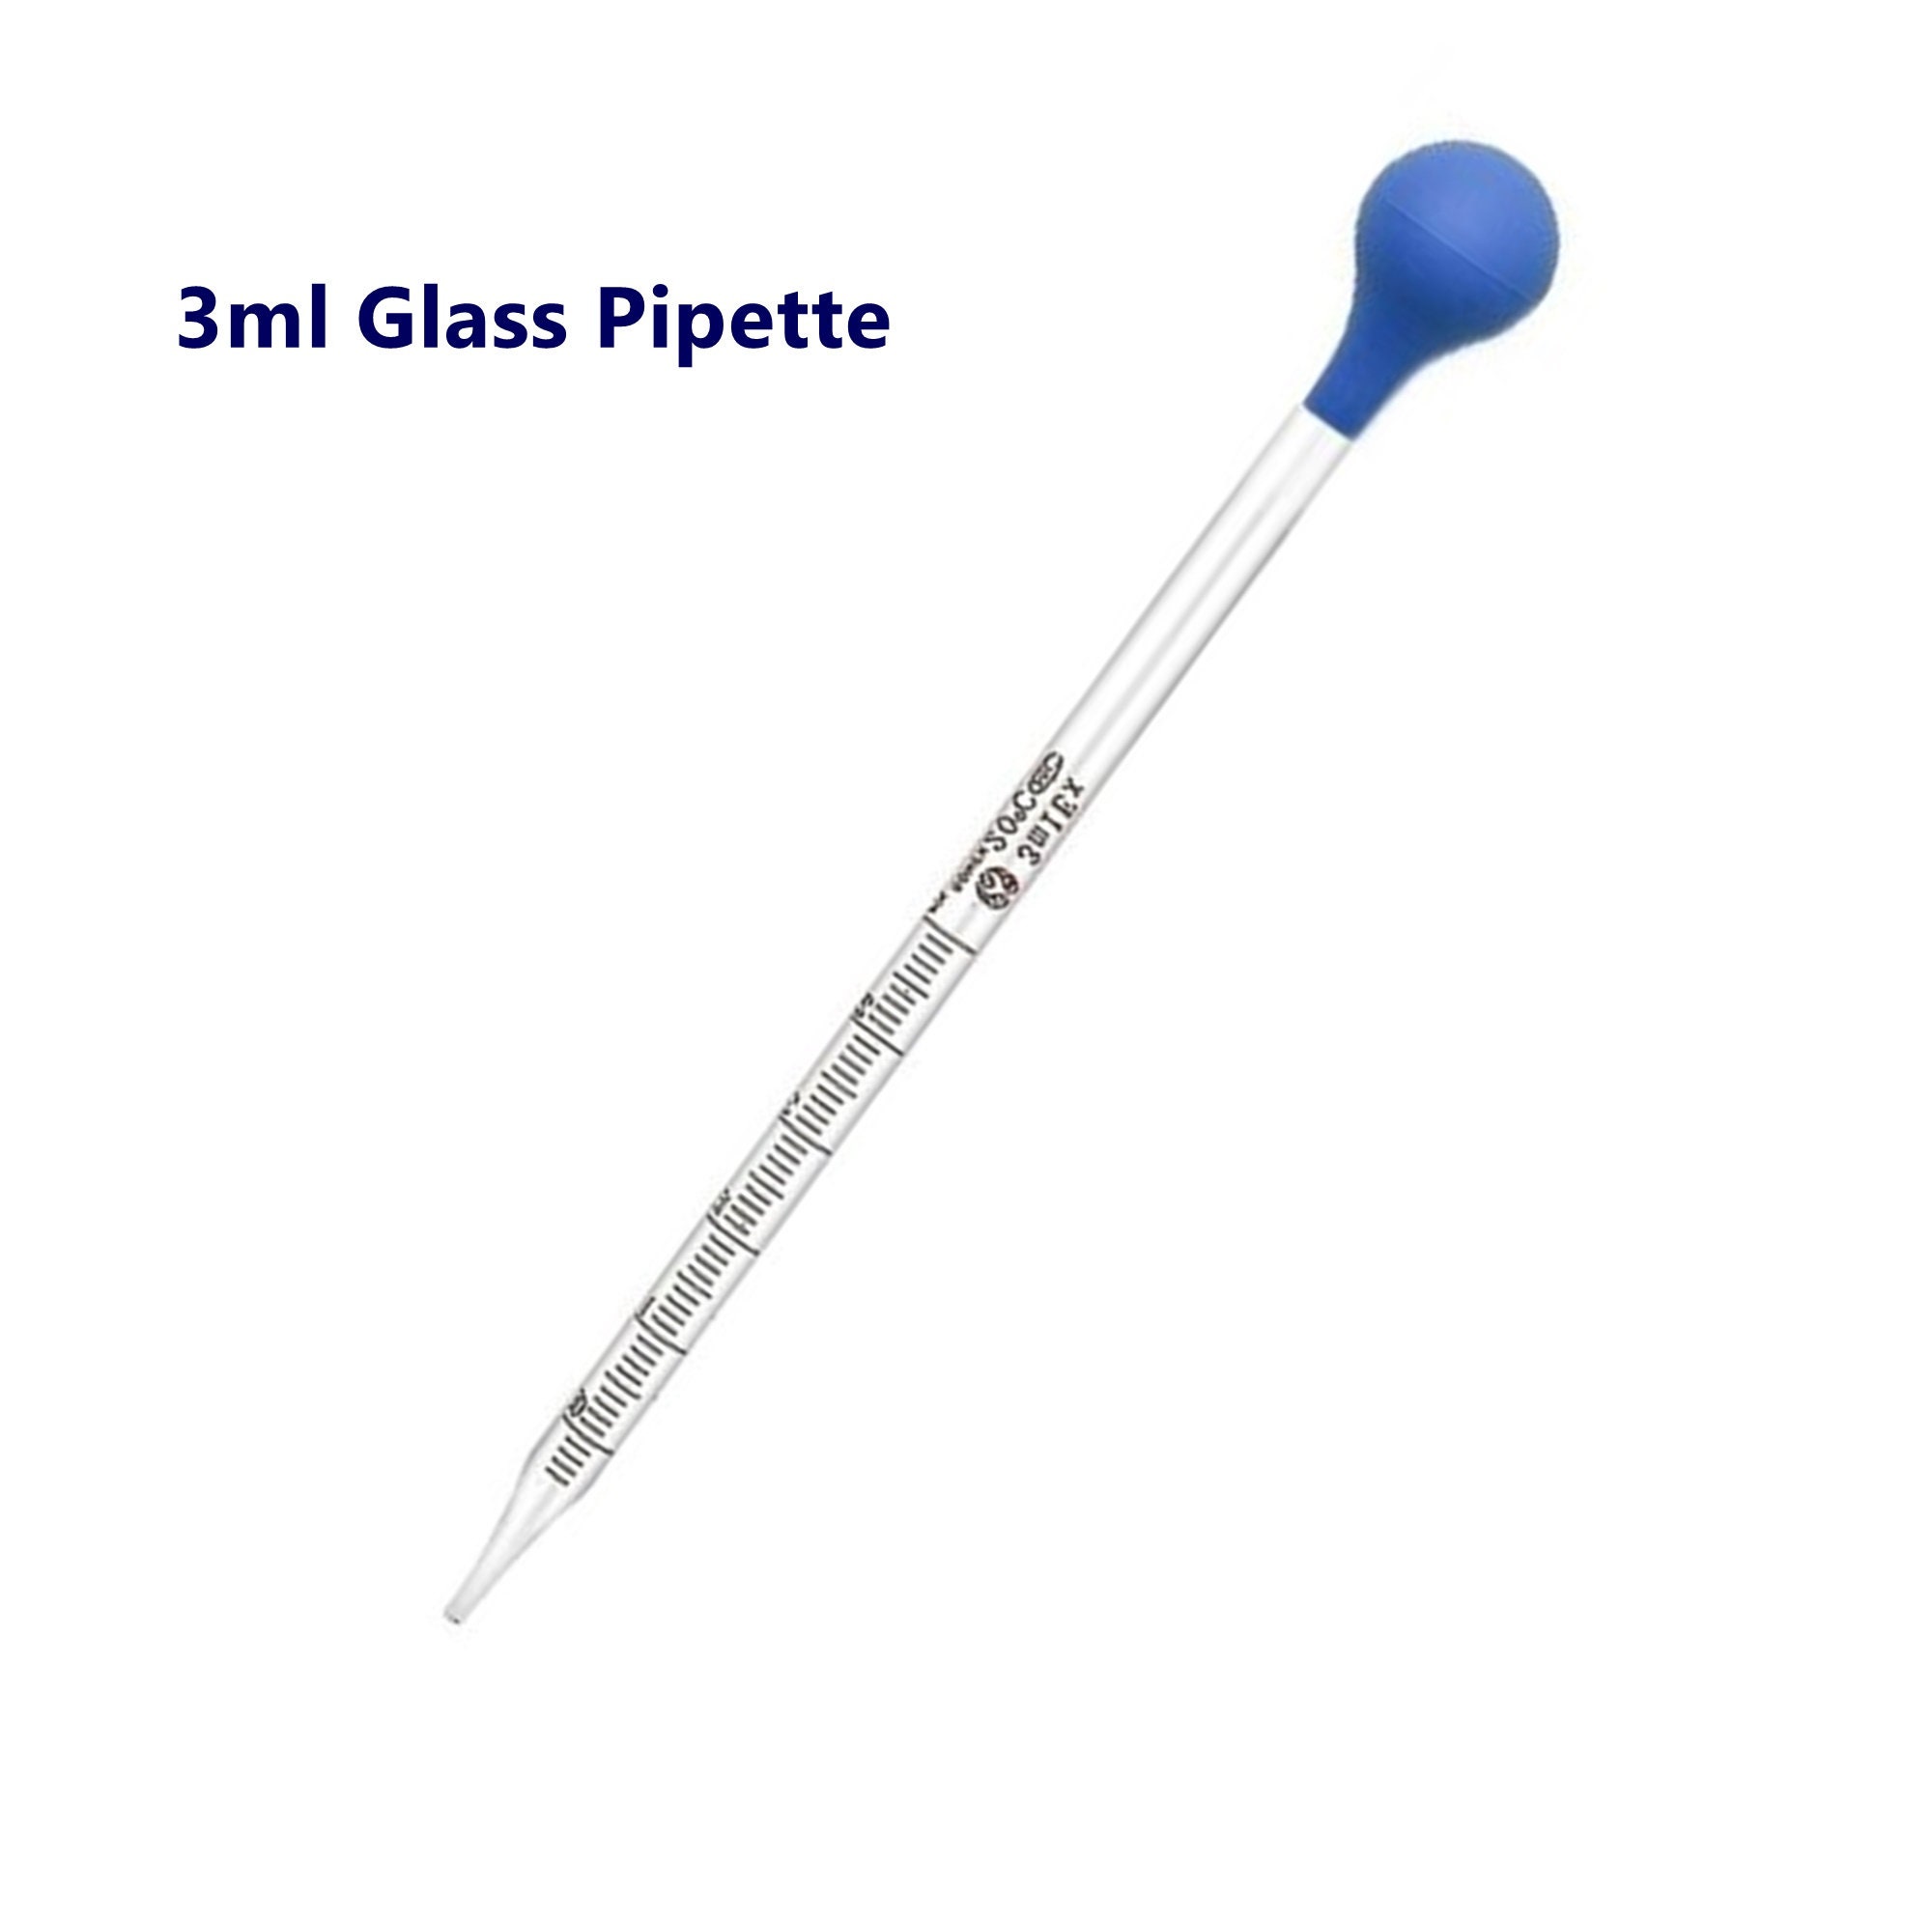 PIPETTE DROPPERS 3 ML Size Reusable Clear Glass Measuring